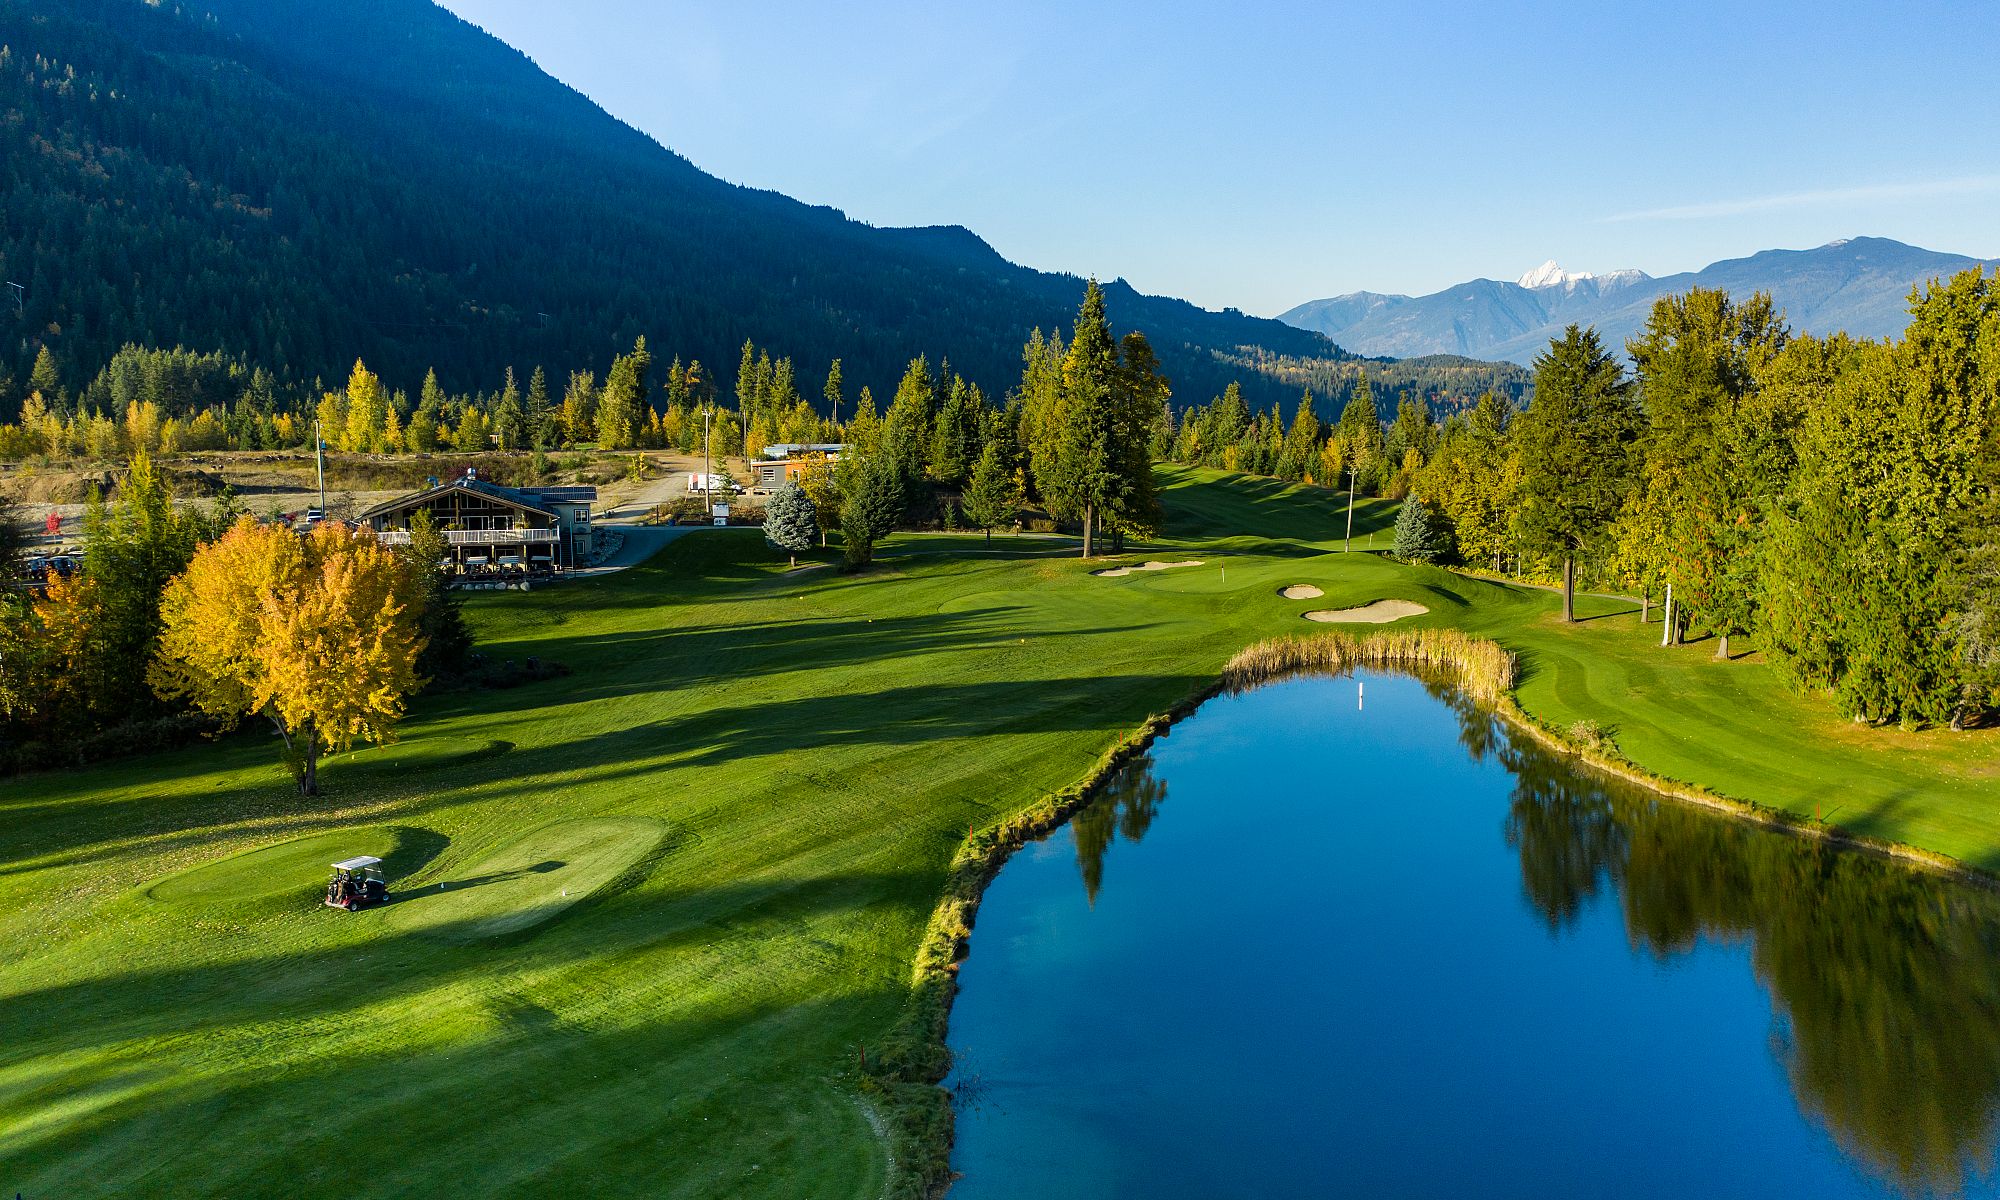 Play among friends at one of nature's most impressive golf courses!